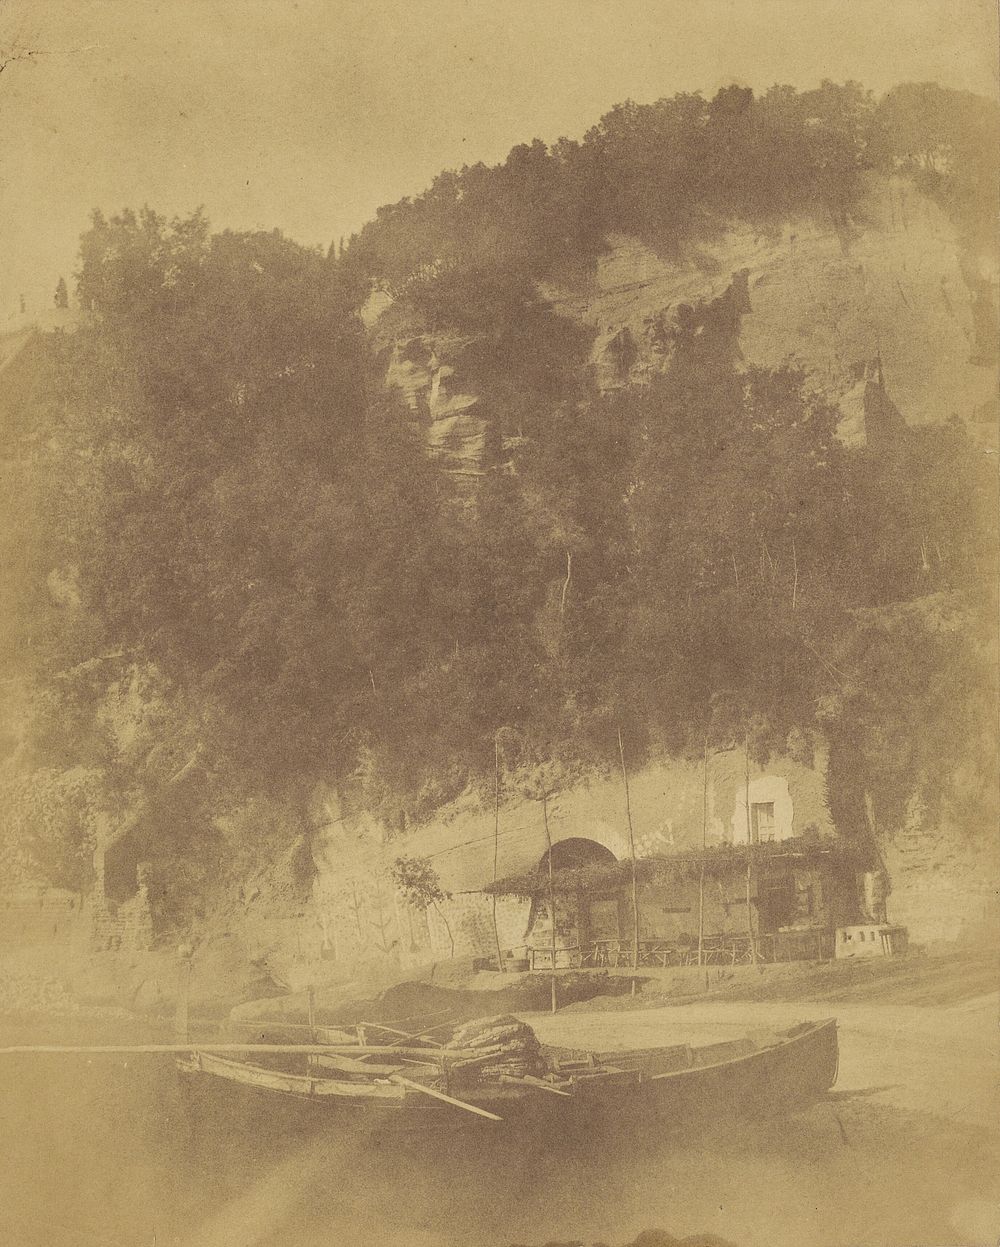 Beach Front Cafe Built into Cliff by Firmin Eugène Le Dien and Gustave Le Gray